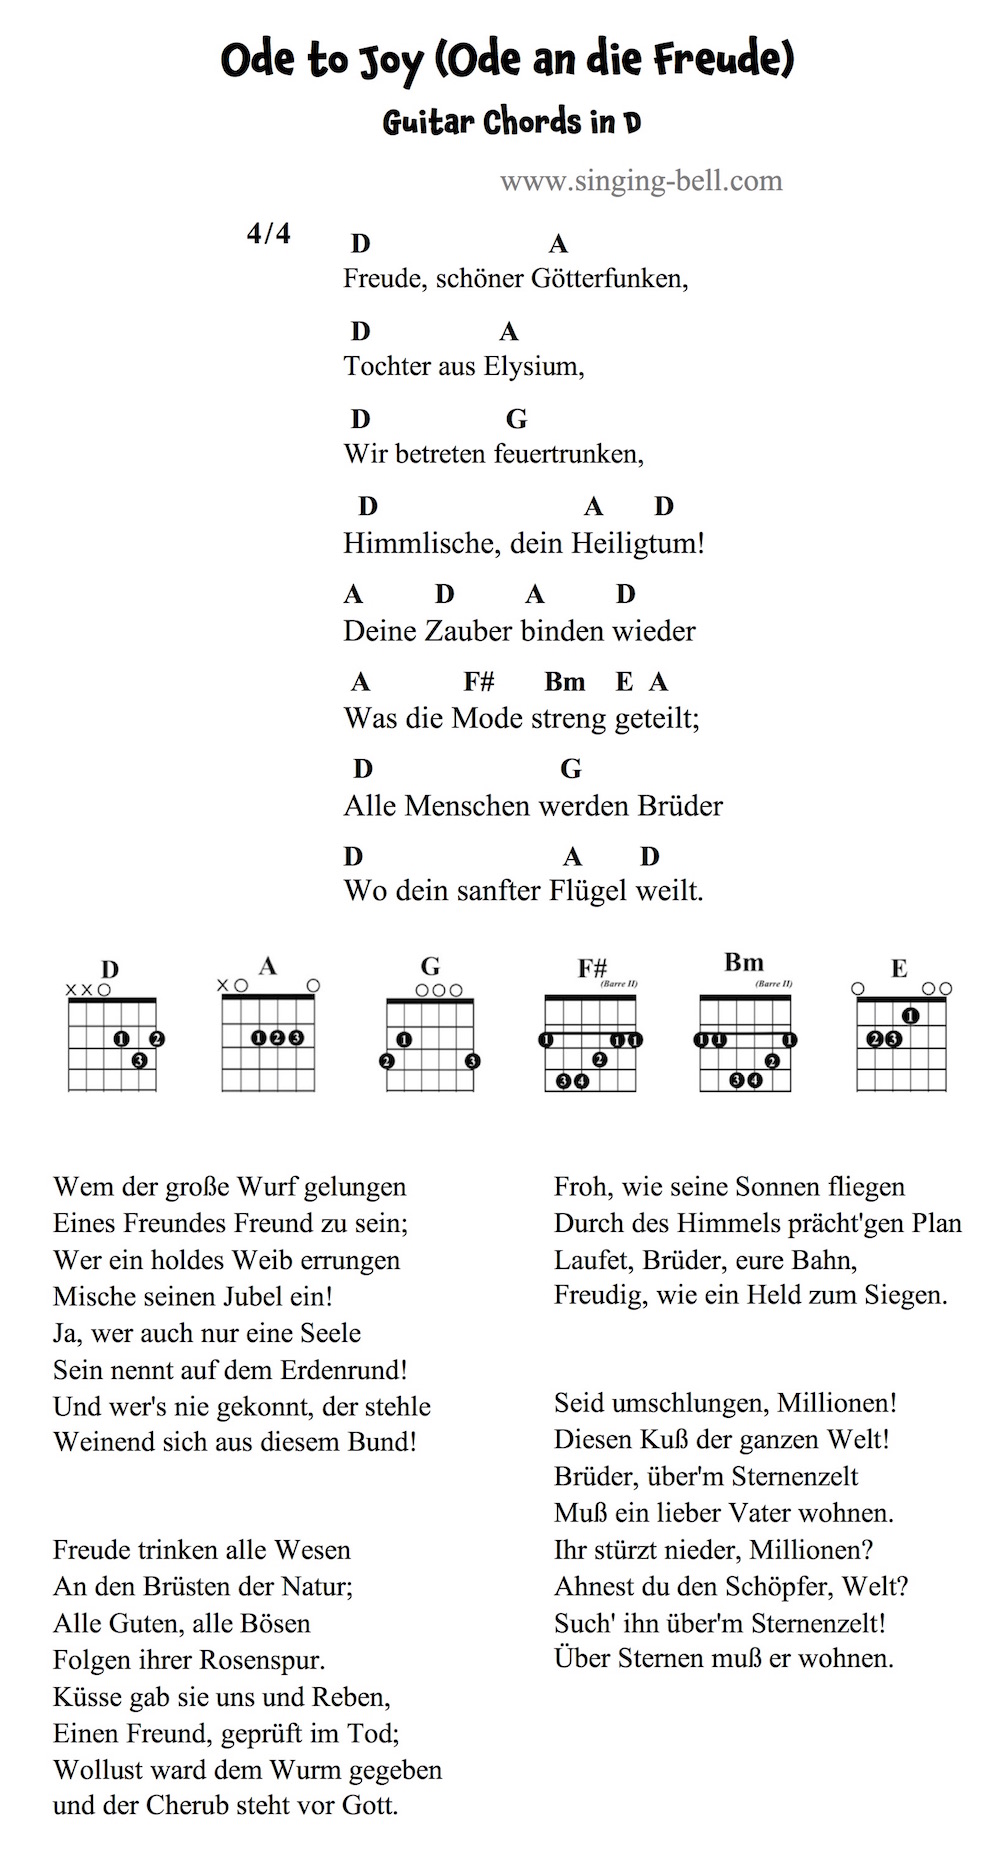 Ode to Joy (Ode an die Freude) Guitar Chords and Tabs in D major.